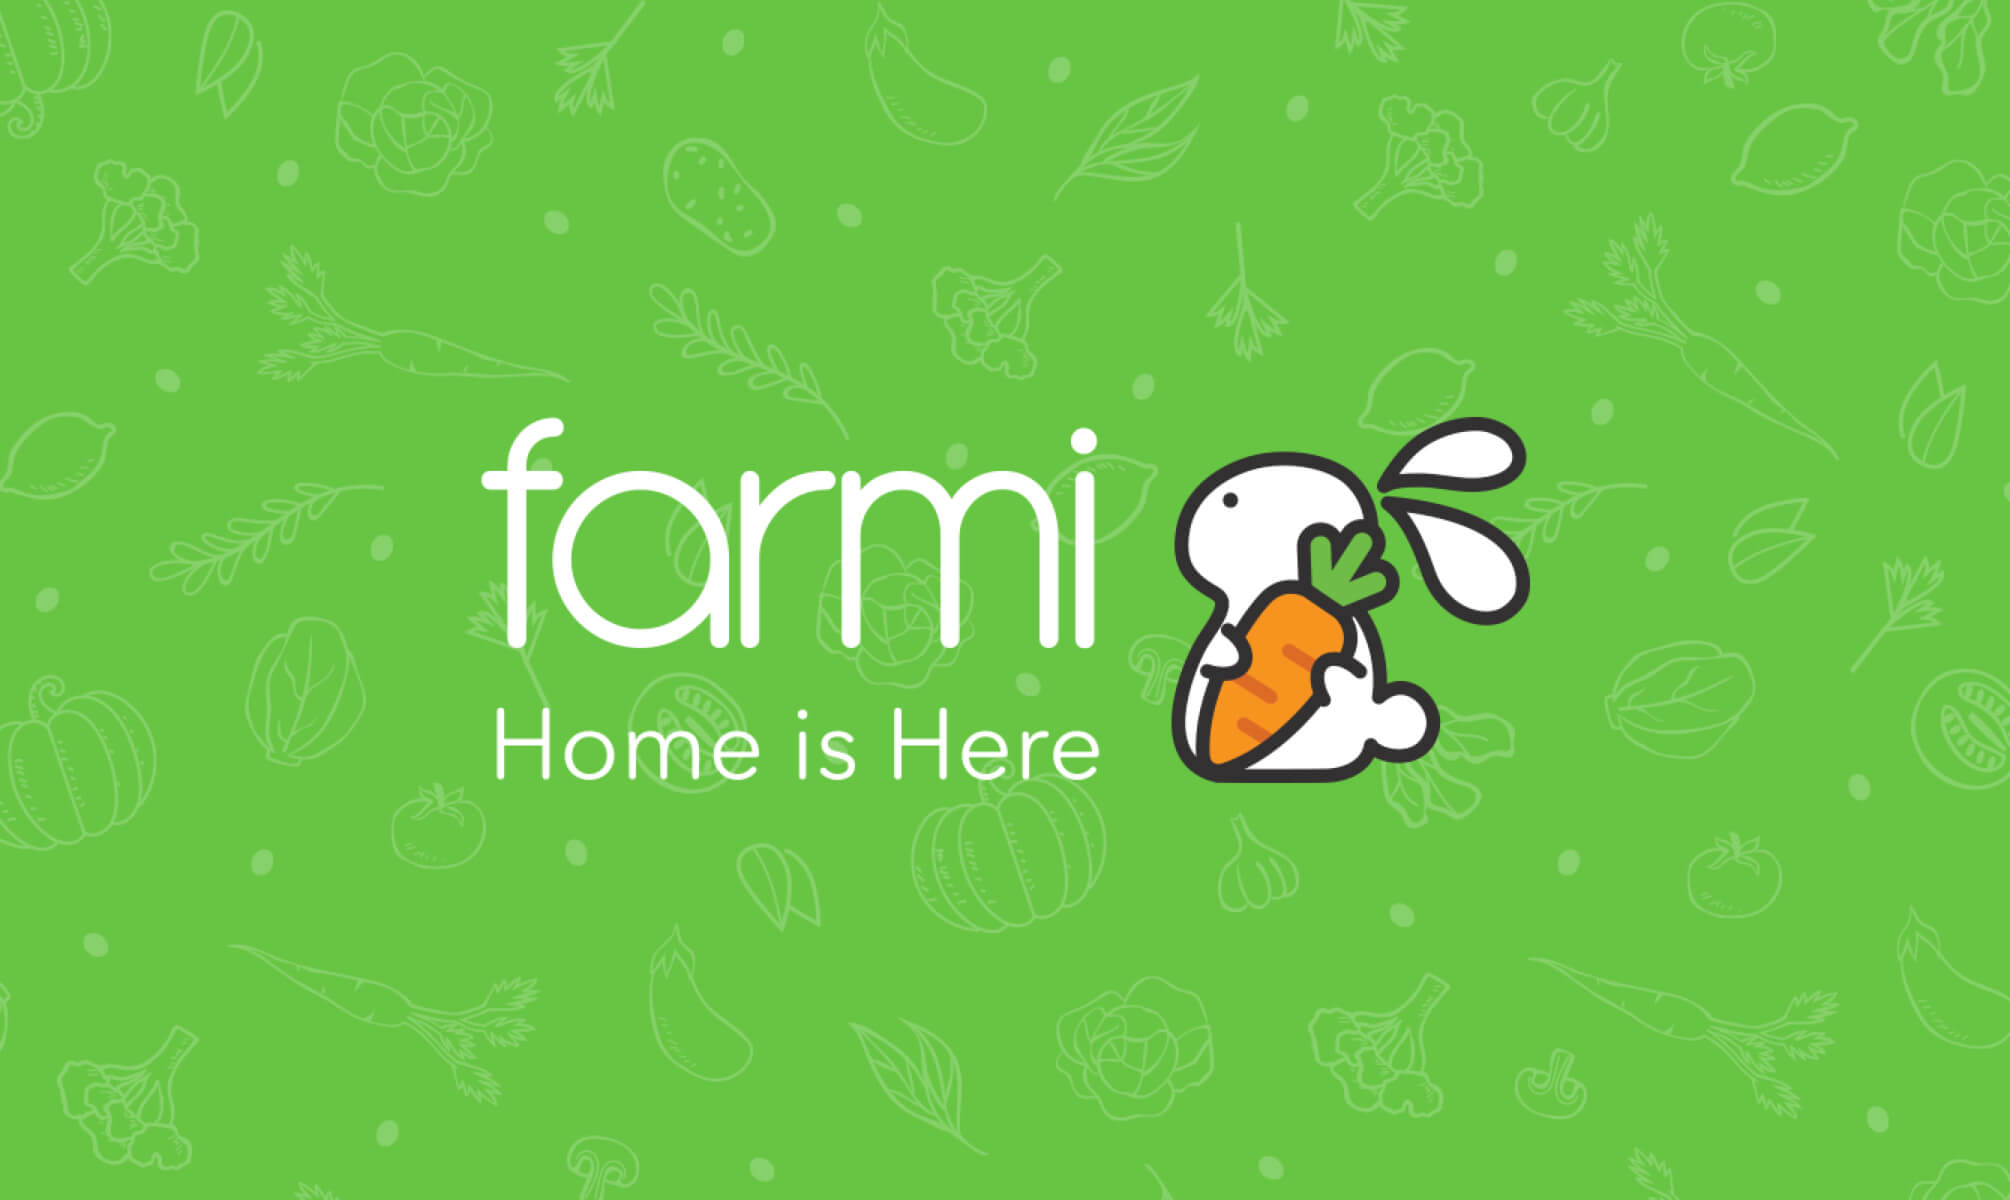 GIANTY Design designed the logo of Farmi - An online fast delivery shopping application